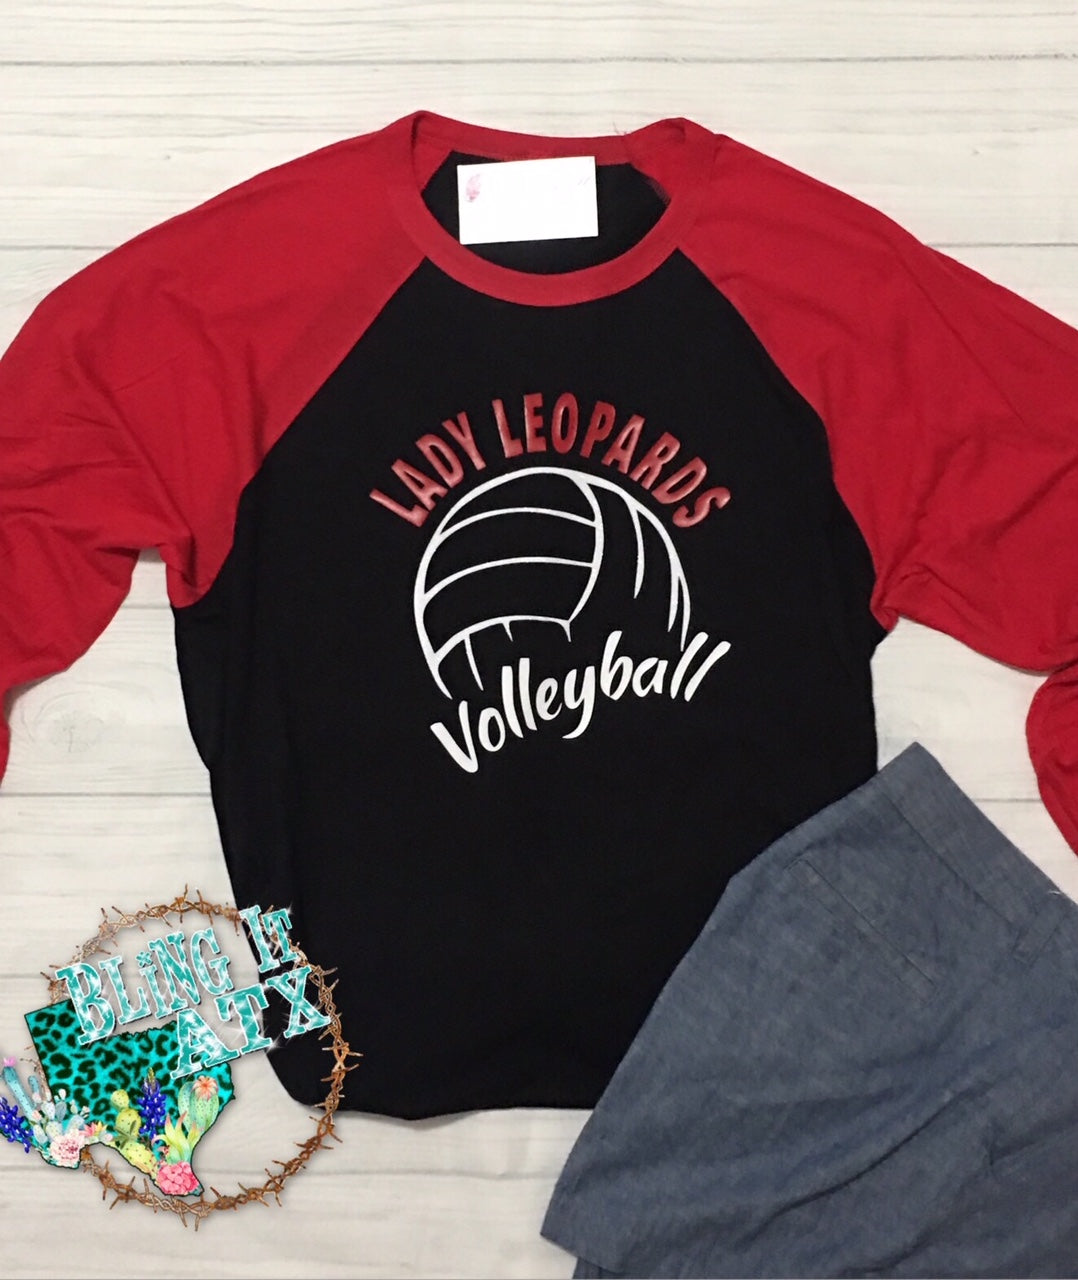 CPMS Lady Leopards volleyball tee